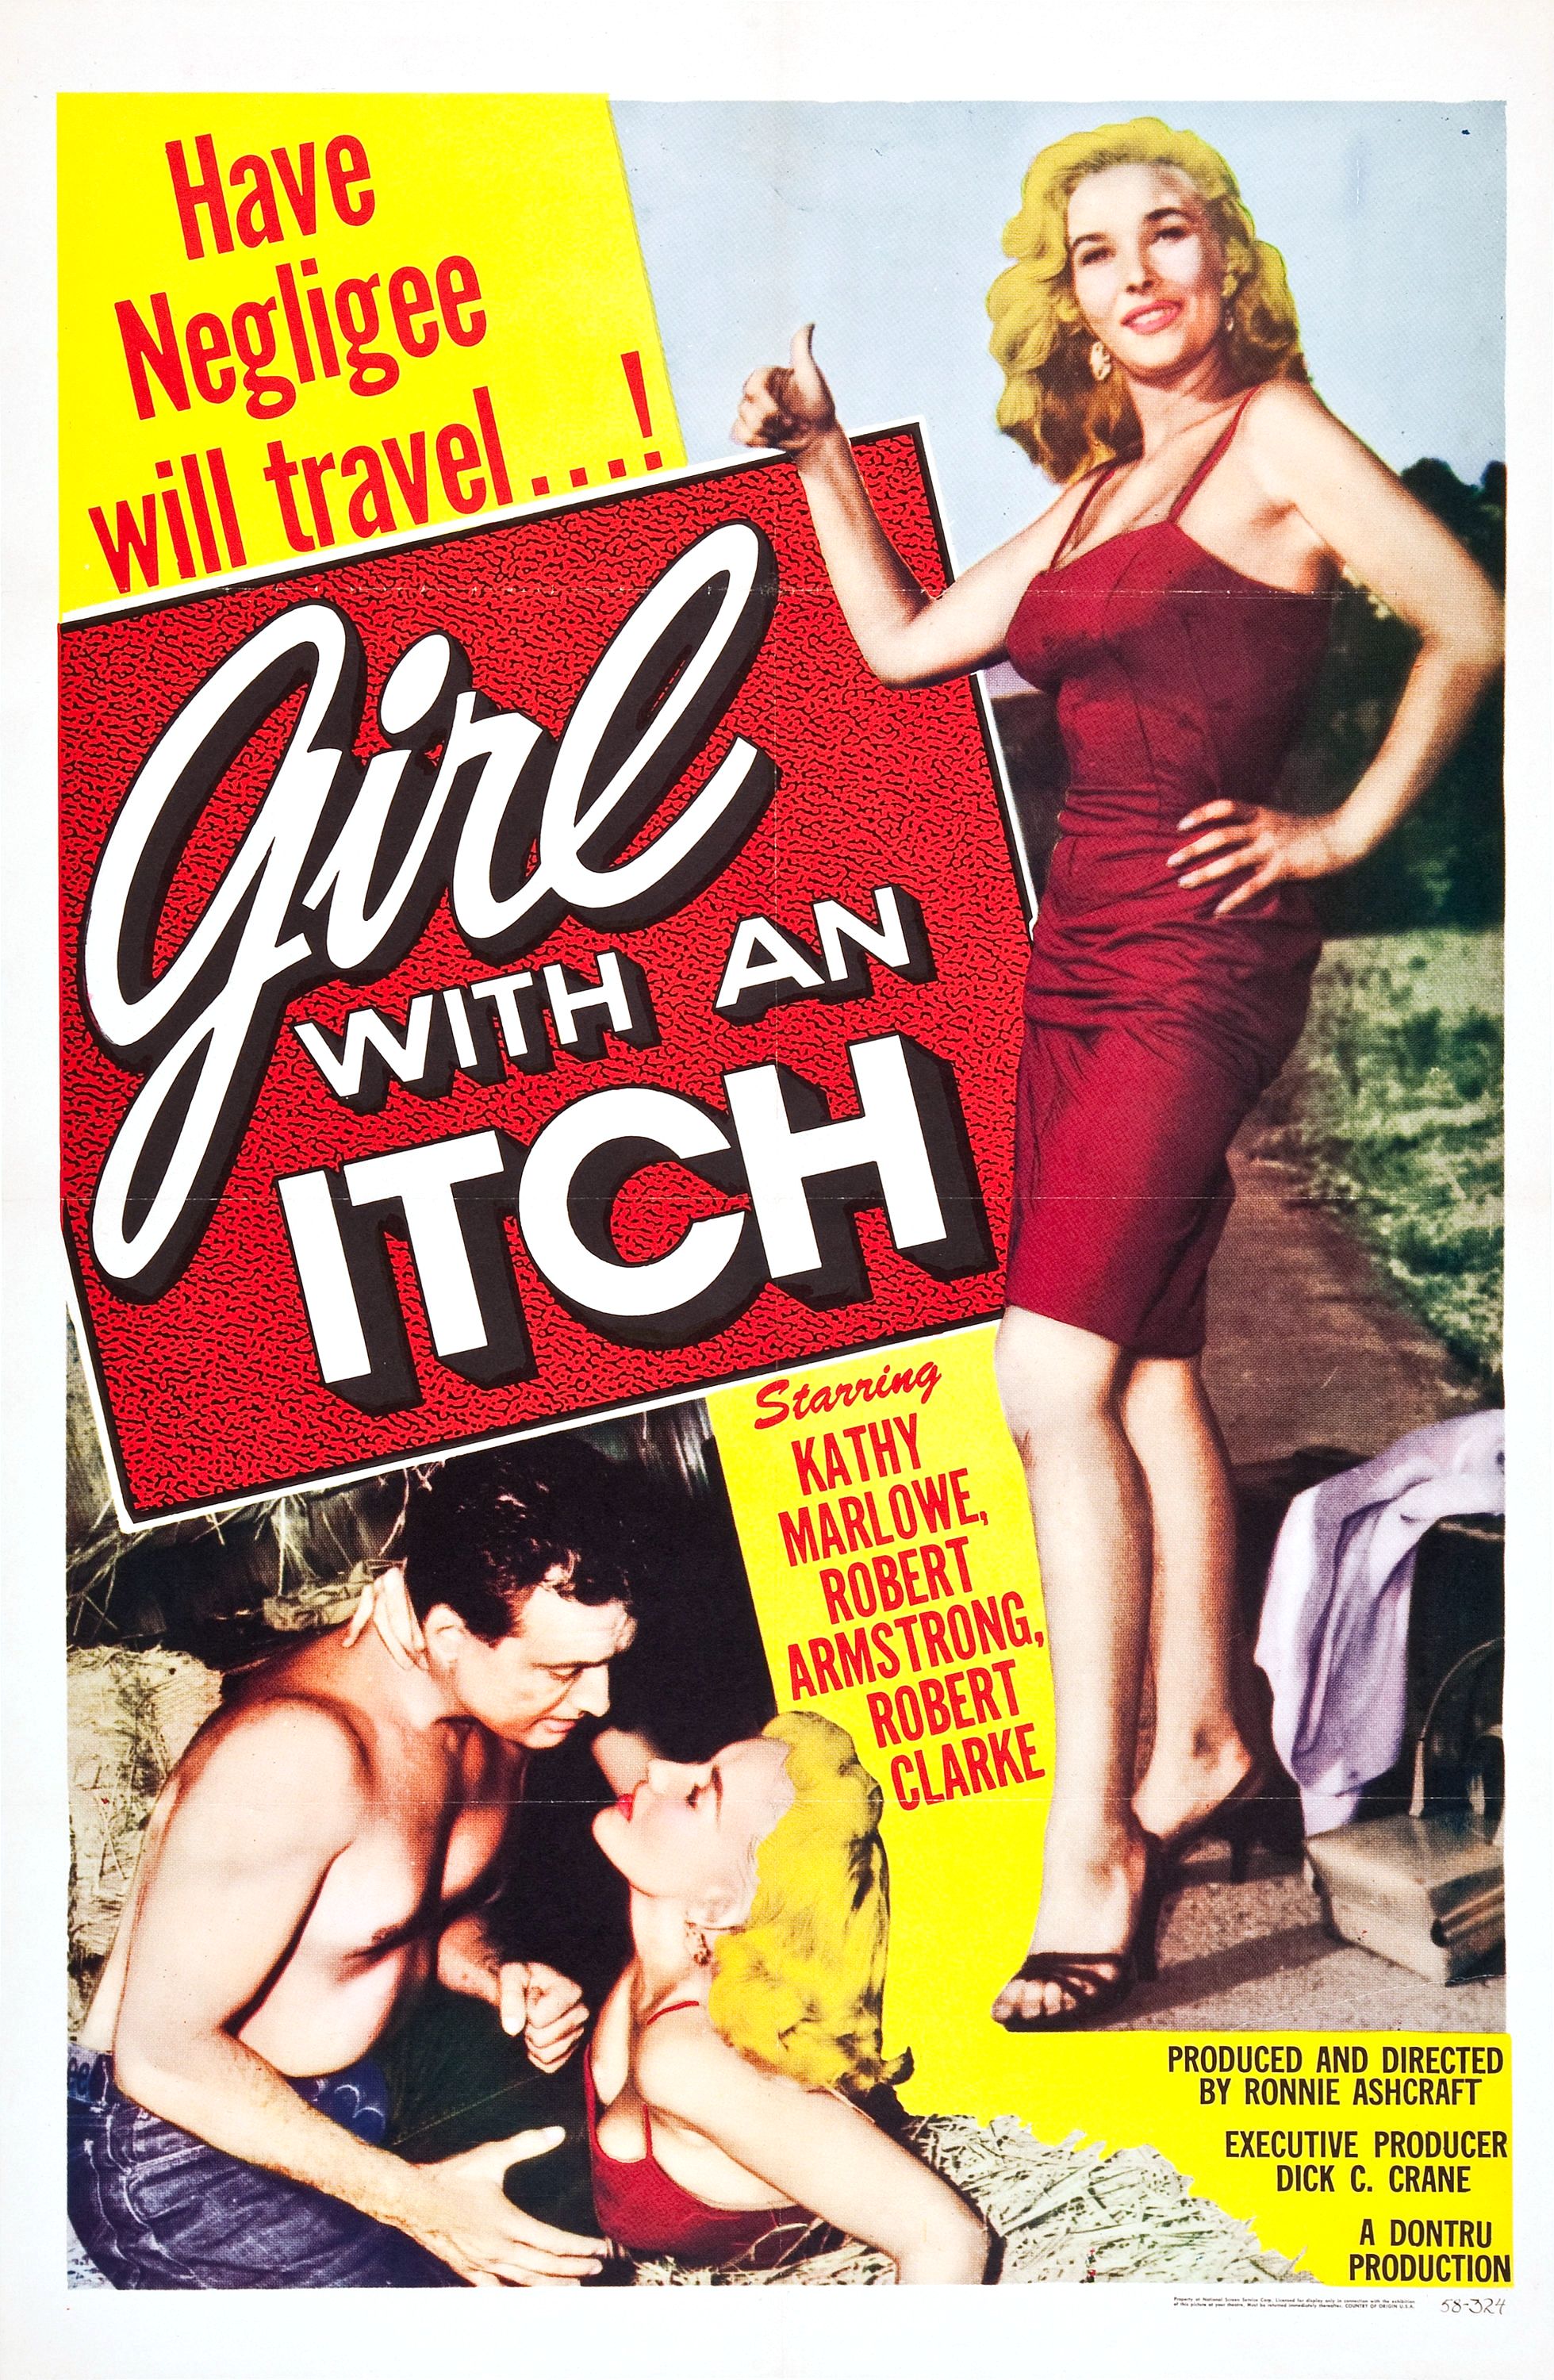 Girl with an Itch (1958) Screenshot 2 